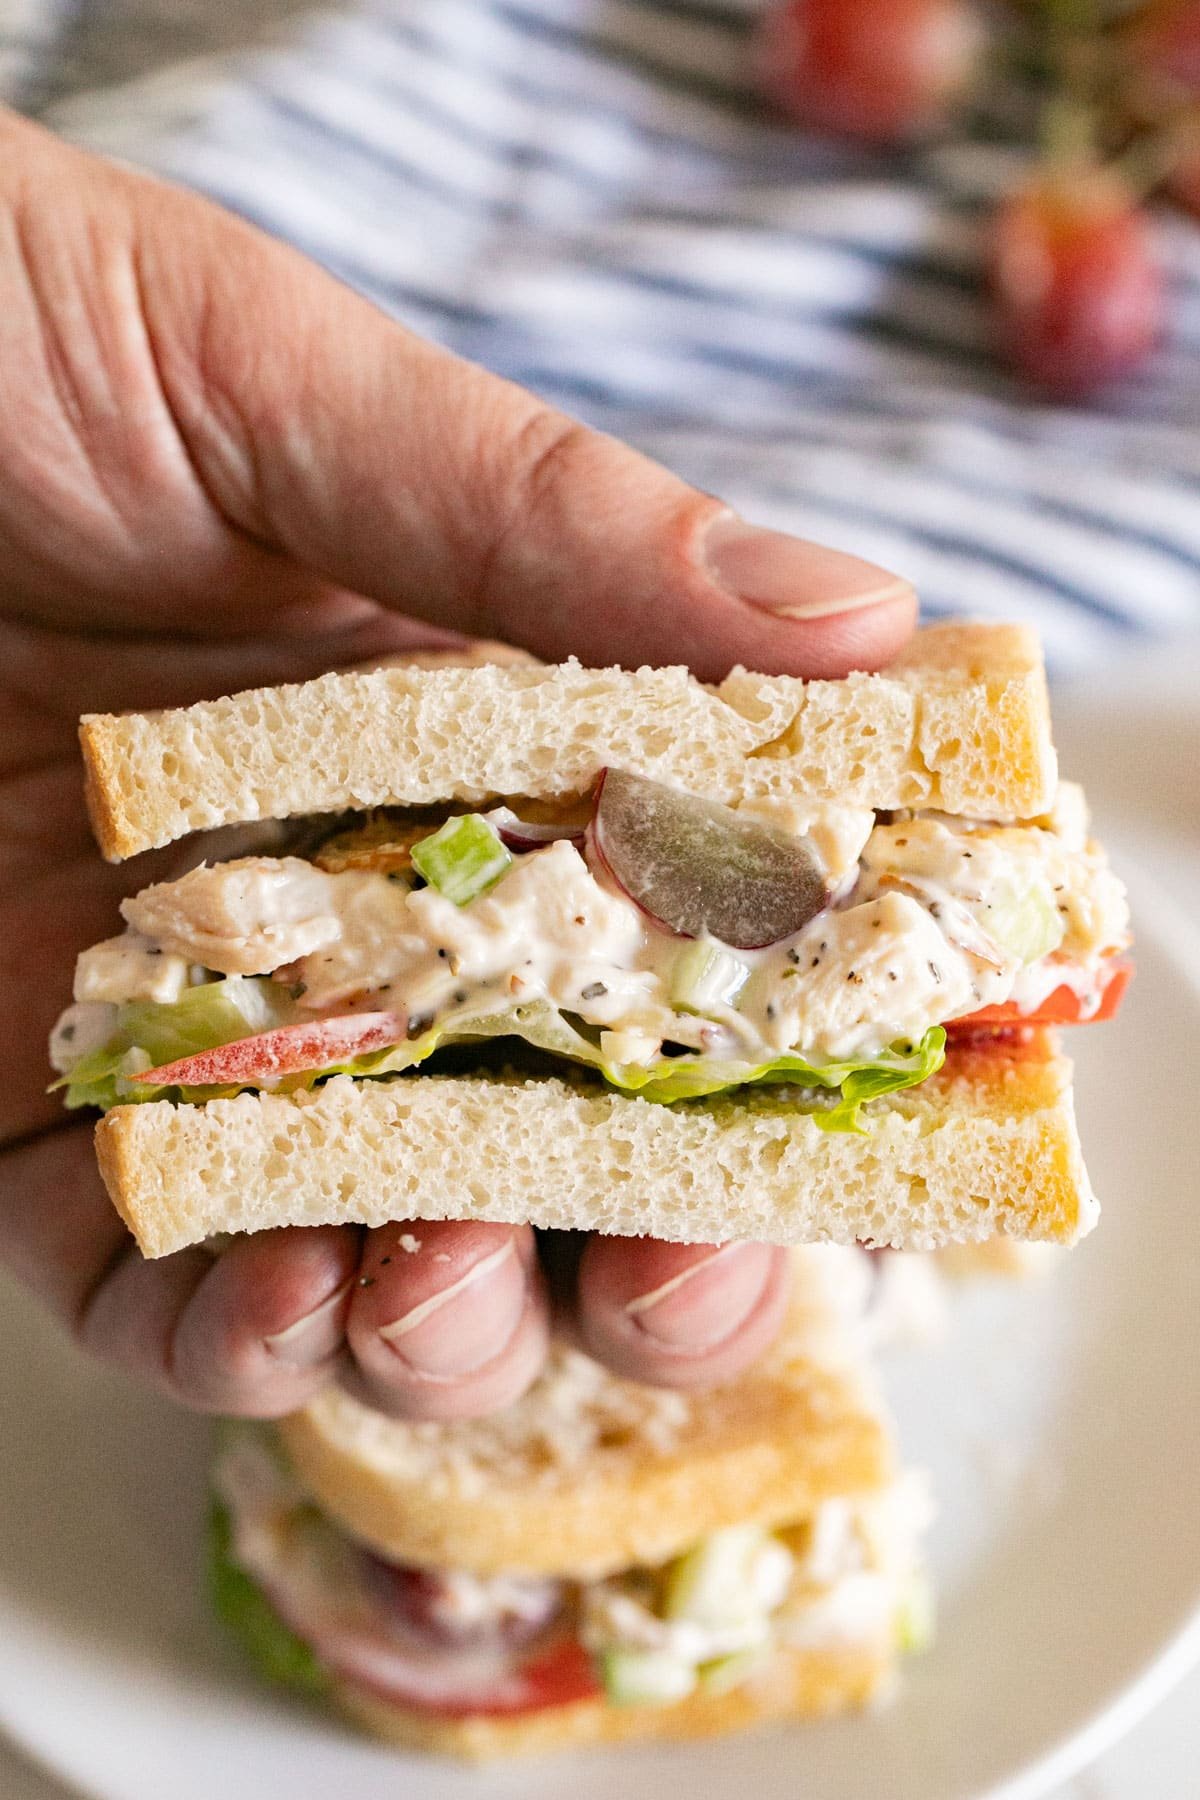 A hand hold a half chicken salad sandwich revealing the inside of it